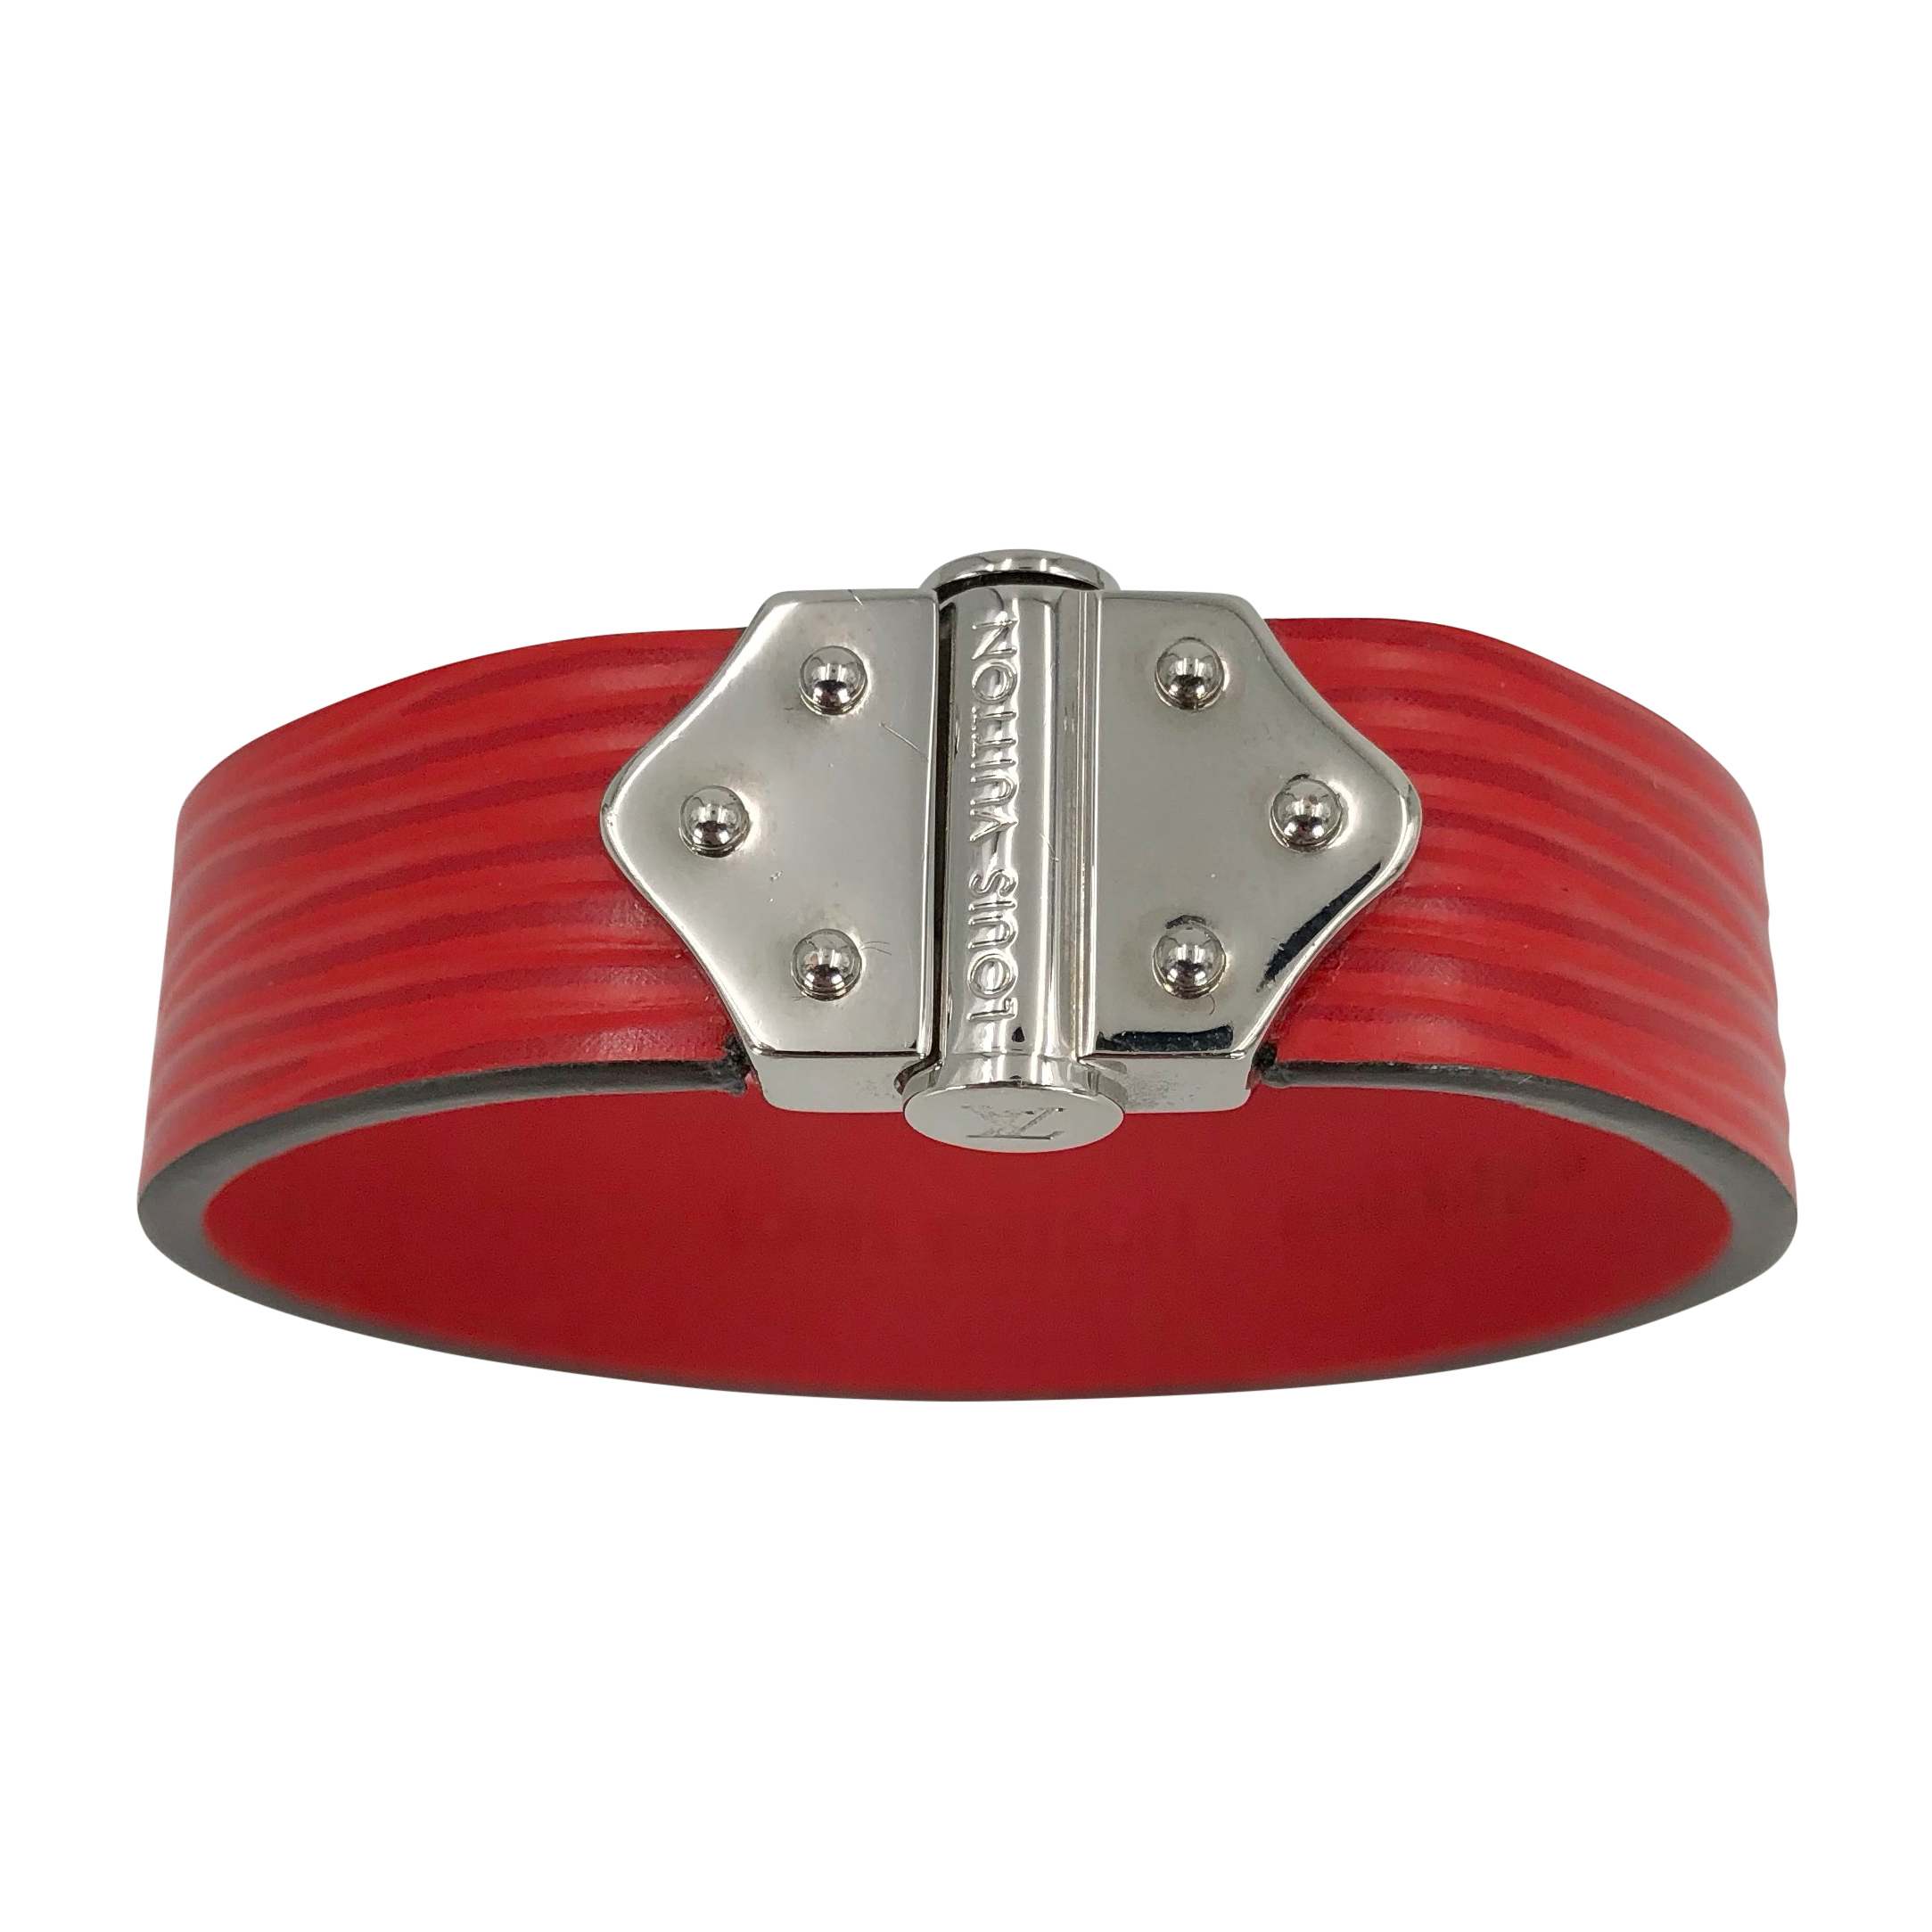 Louis Vuitton LV Iconic Leather Bracelet Red Calf. Size 19